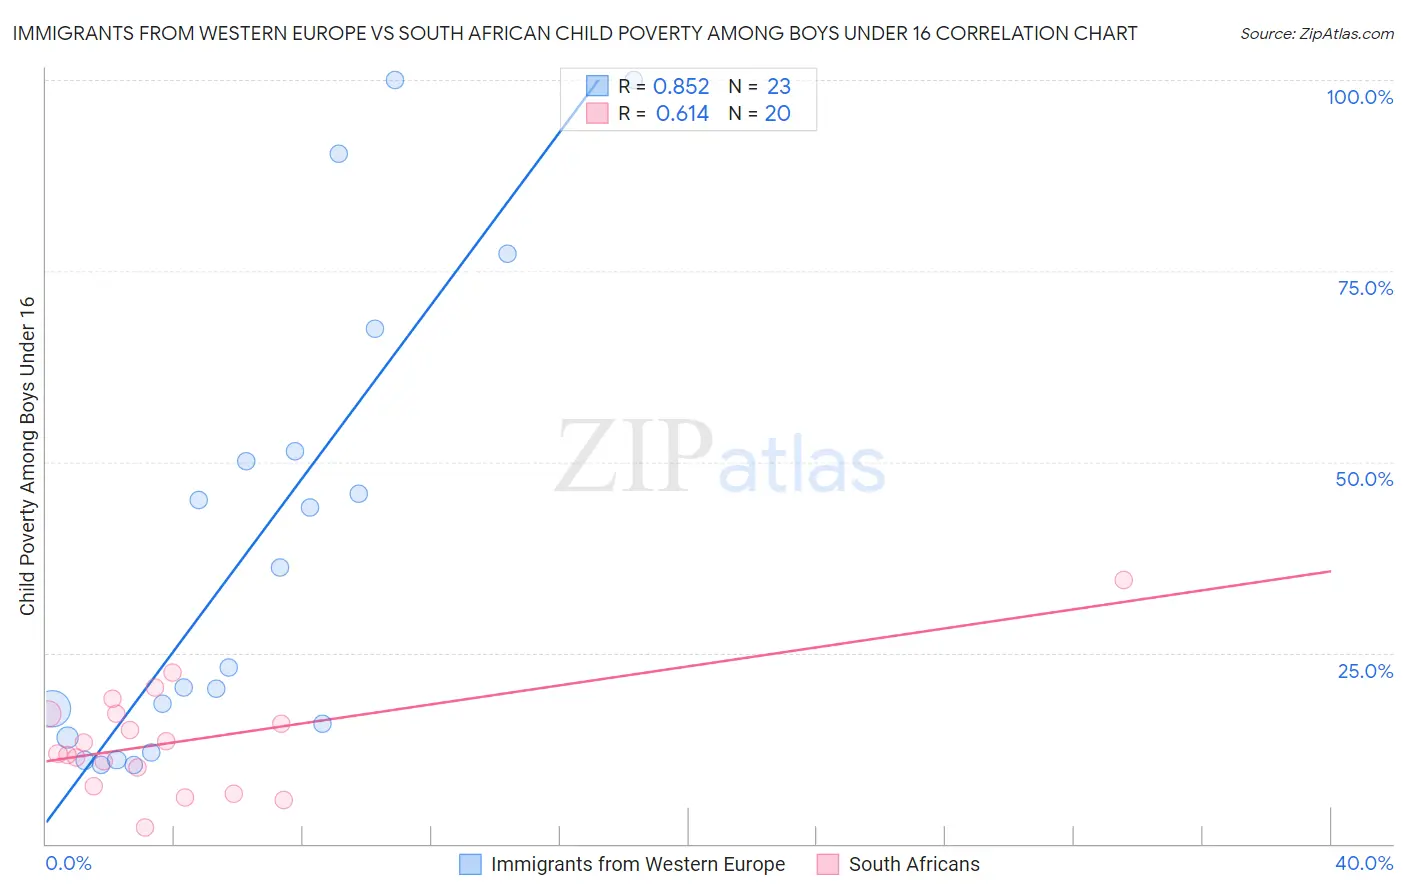 Immigrants from Western Europe vs South African Child Poverty Among Boys Under 16